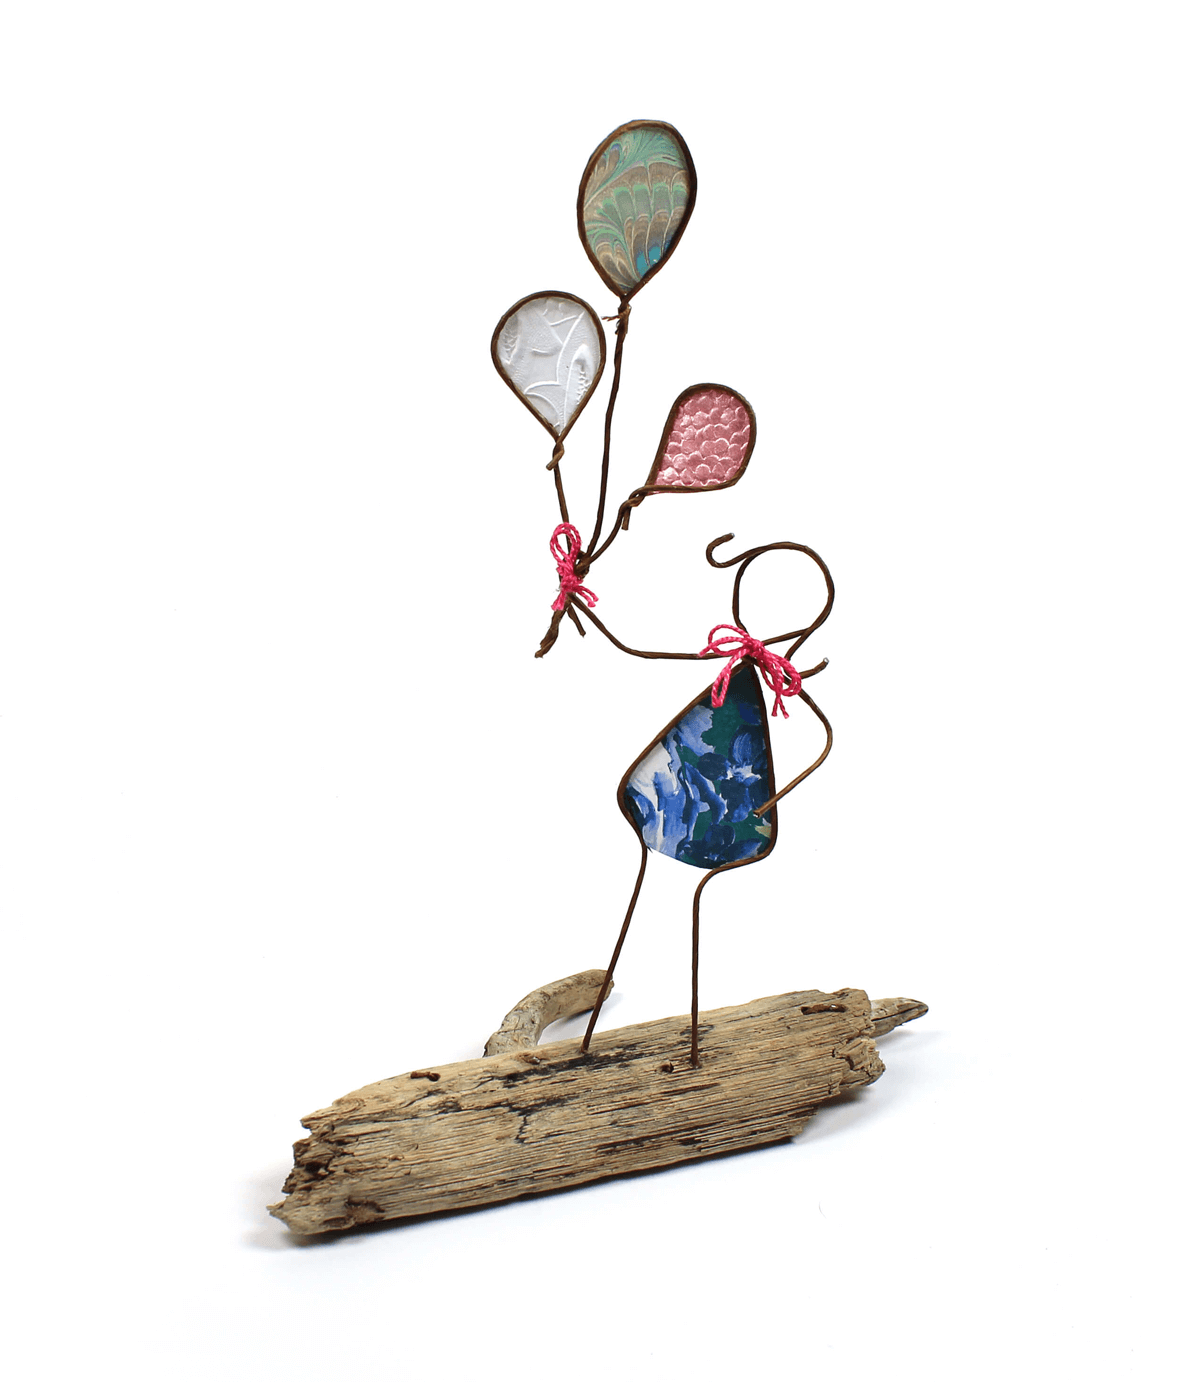 Image of Girl with Balloons, a sculpture in wire and cut paper on driftwood.